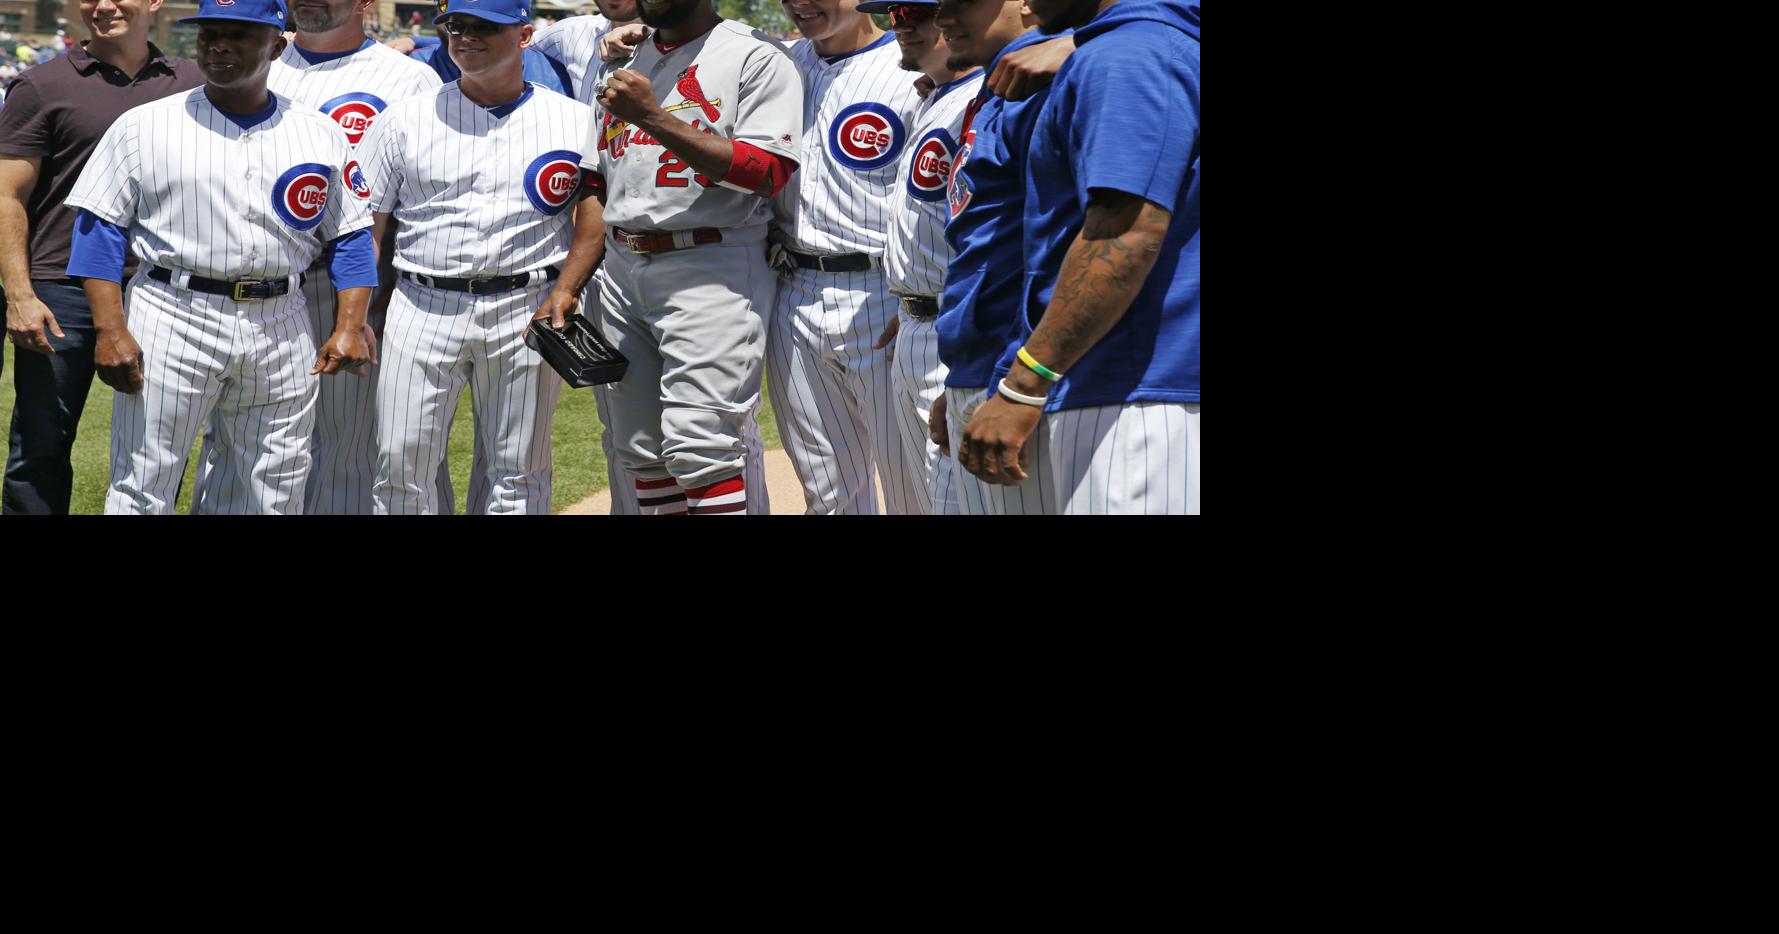 Jon Jay: The Cubs' 'almost-everyday player